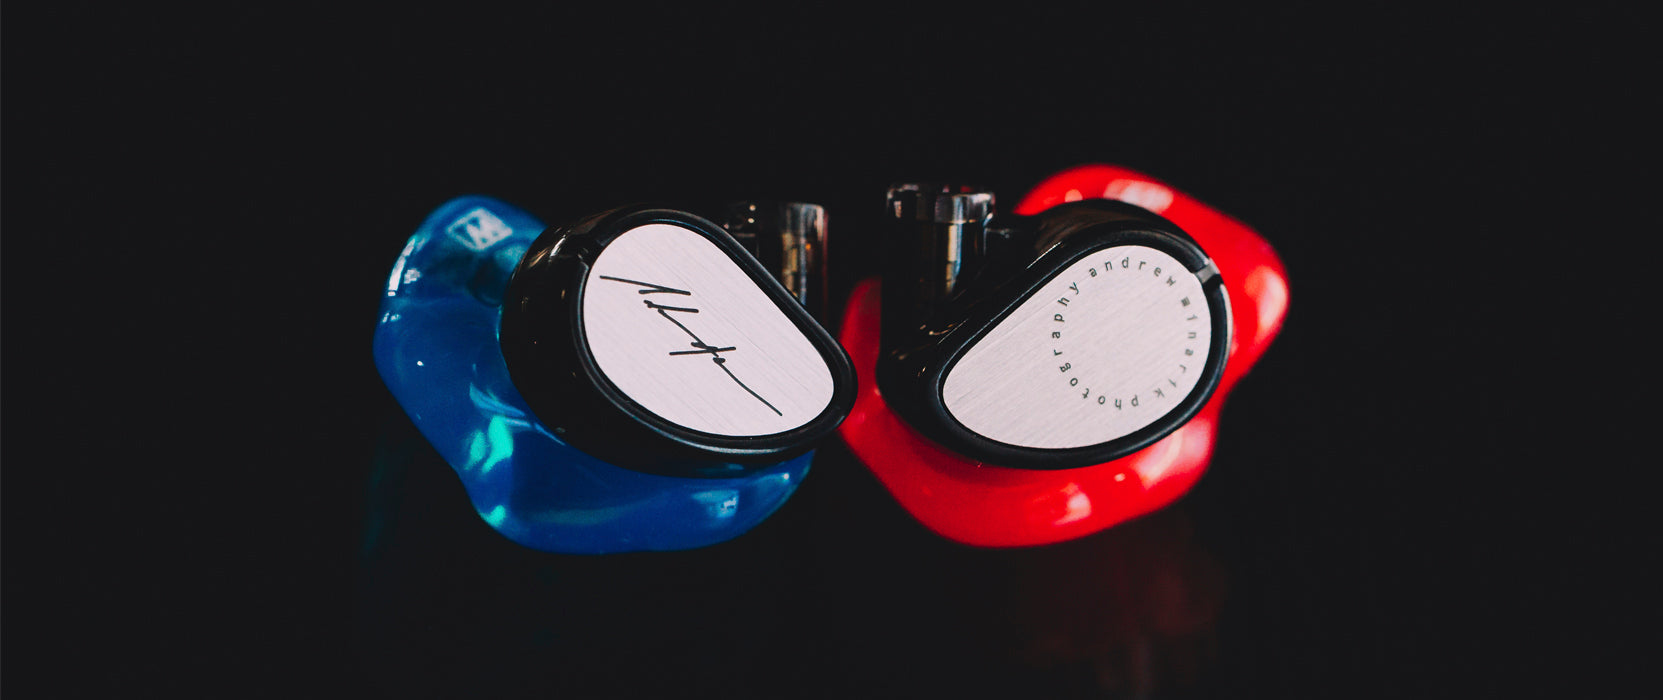 Two custom in-ear monitors, one blue and one red, with sleek, reflective faceplates featuring minimalistic design elements, resting on a dark, reflective background.